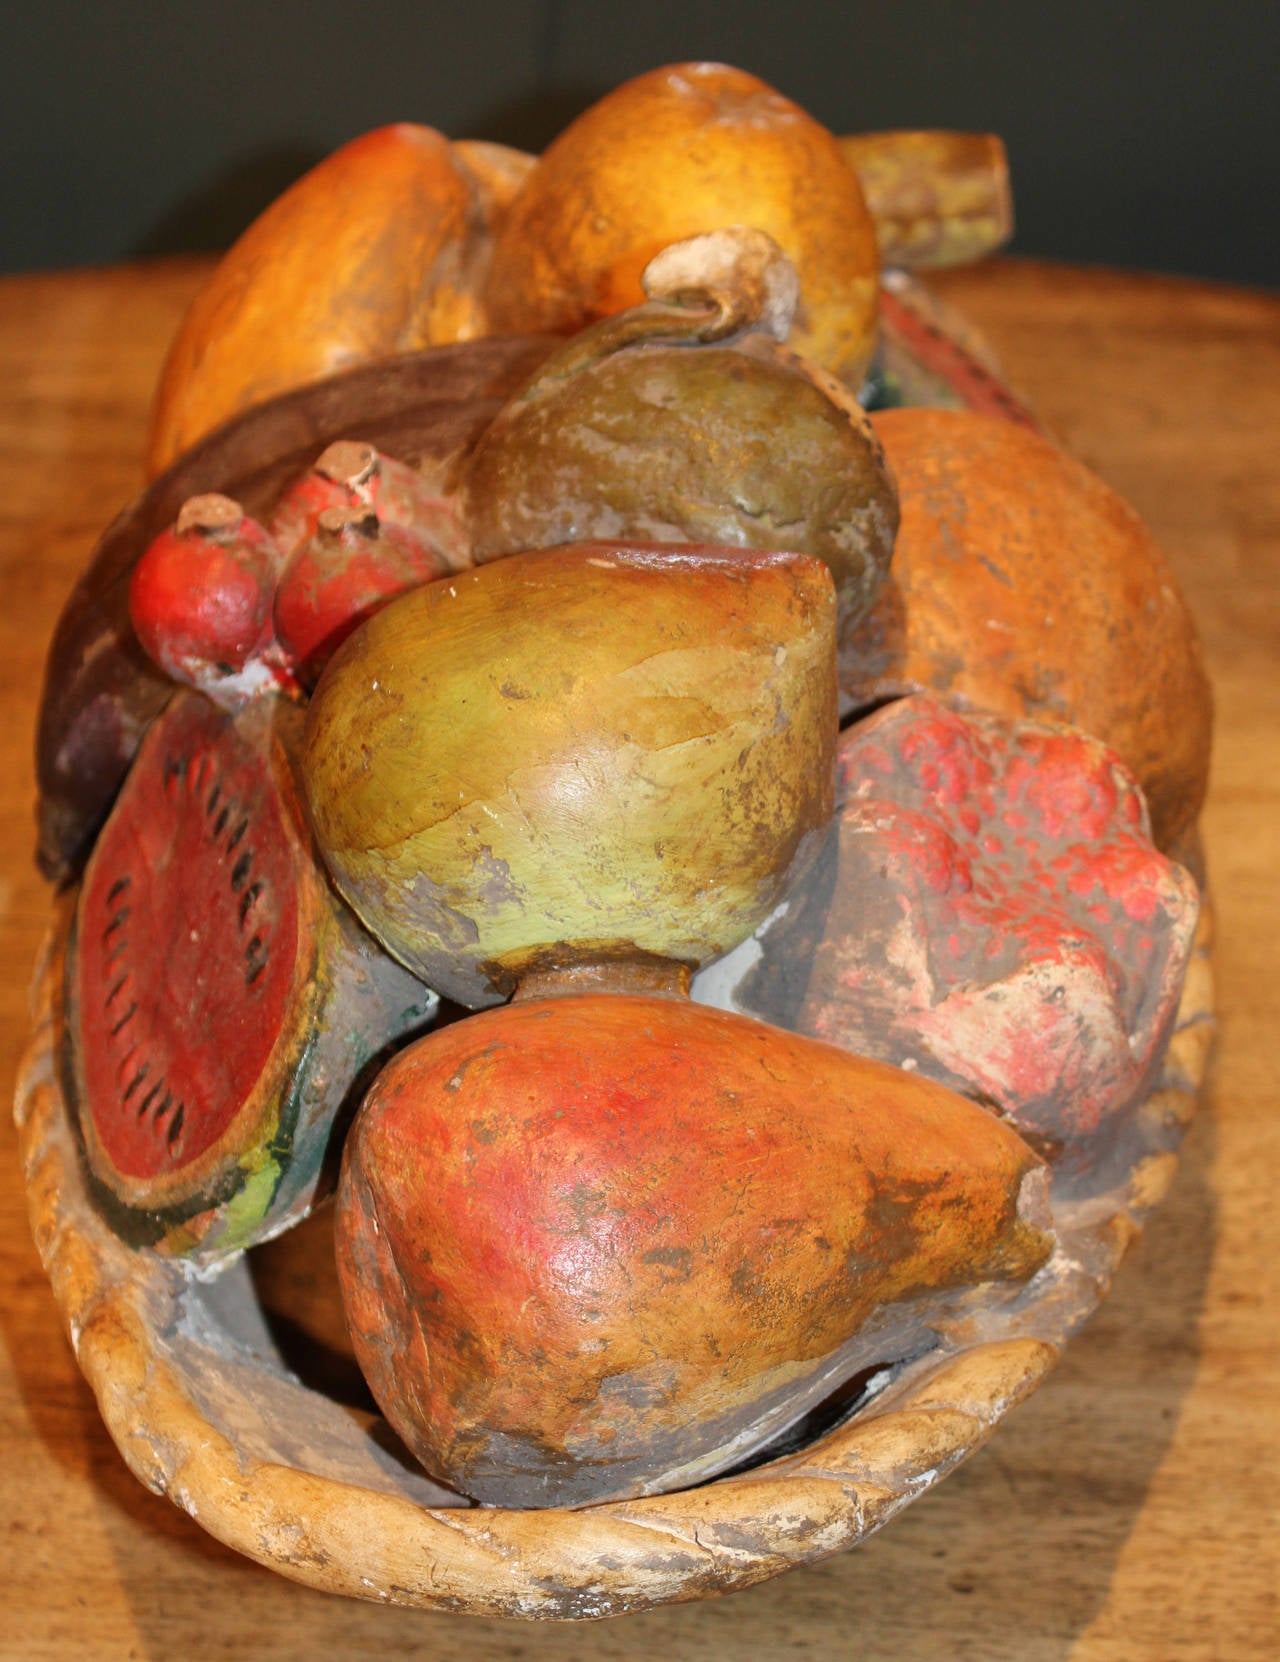 A folk art plaster centerpiece bowl of painted fruit, probably made in Mexico circa 1940, showing a variety of fruit including watermelon, pears, lemons, cherries, and other fruits. Great patina and overall condition.